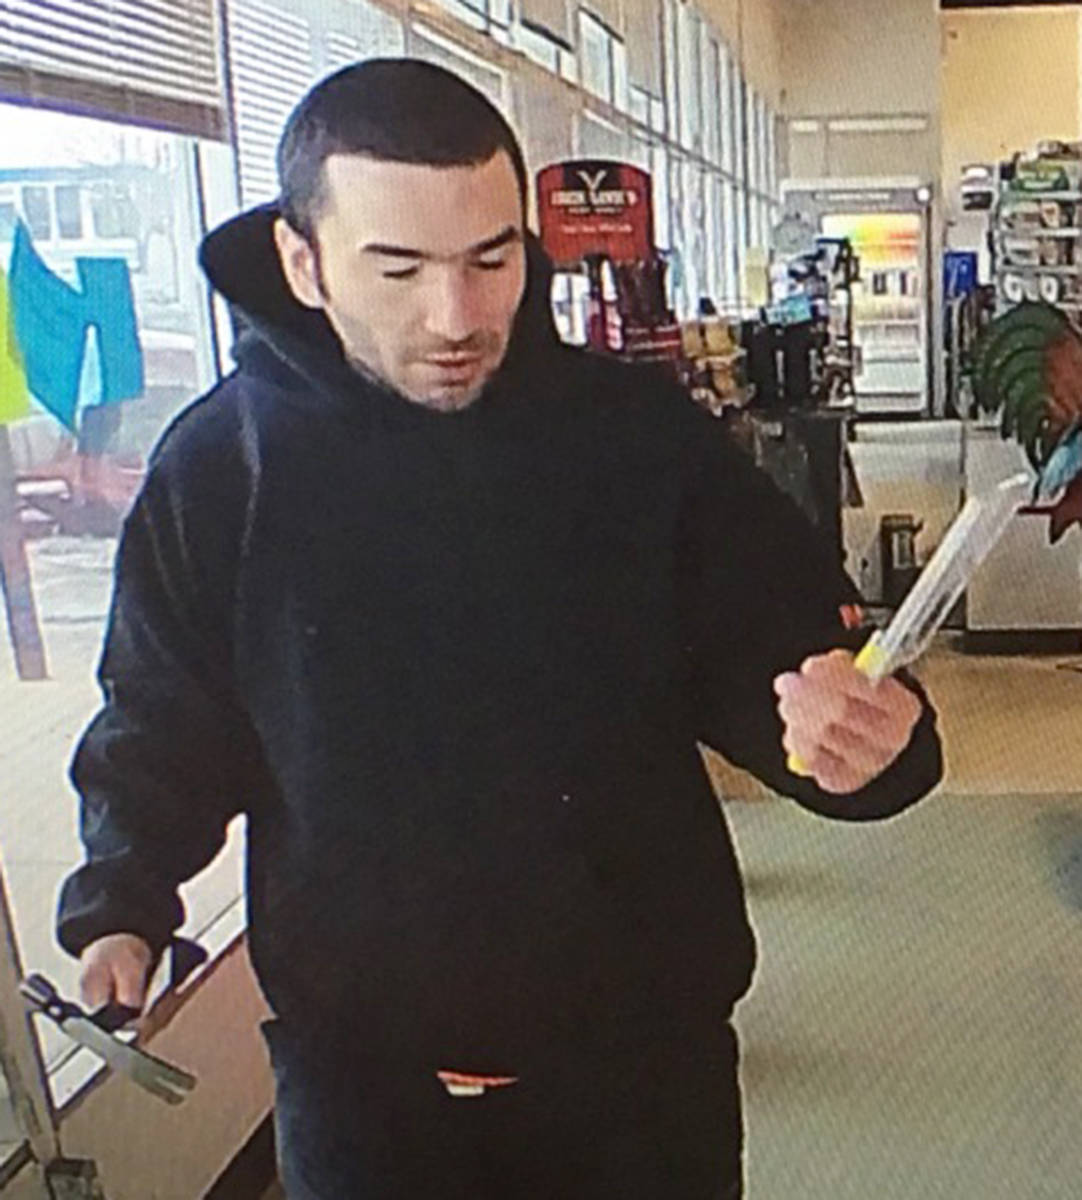 Ponoka RCMP are looking for this man alleged to have taken some items from Main Street Hardware in Ponoka without paying. When asked, the man told the clerk he was ‘borrowing’ the items. RCMP photo